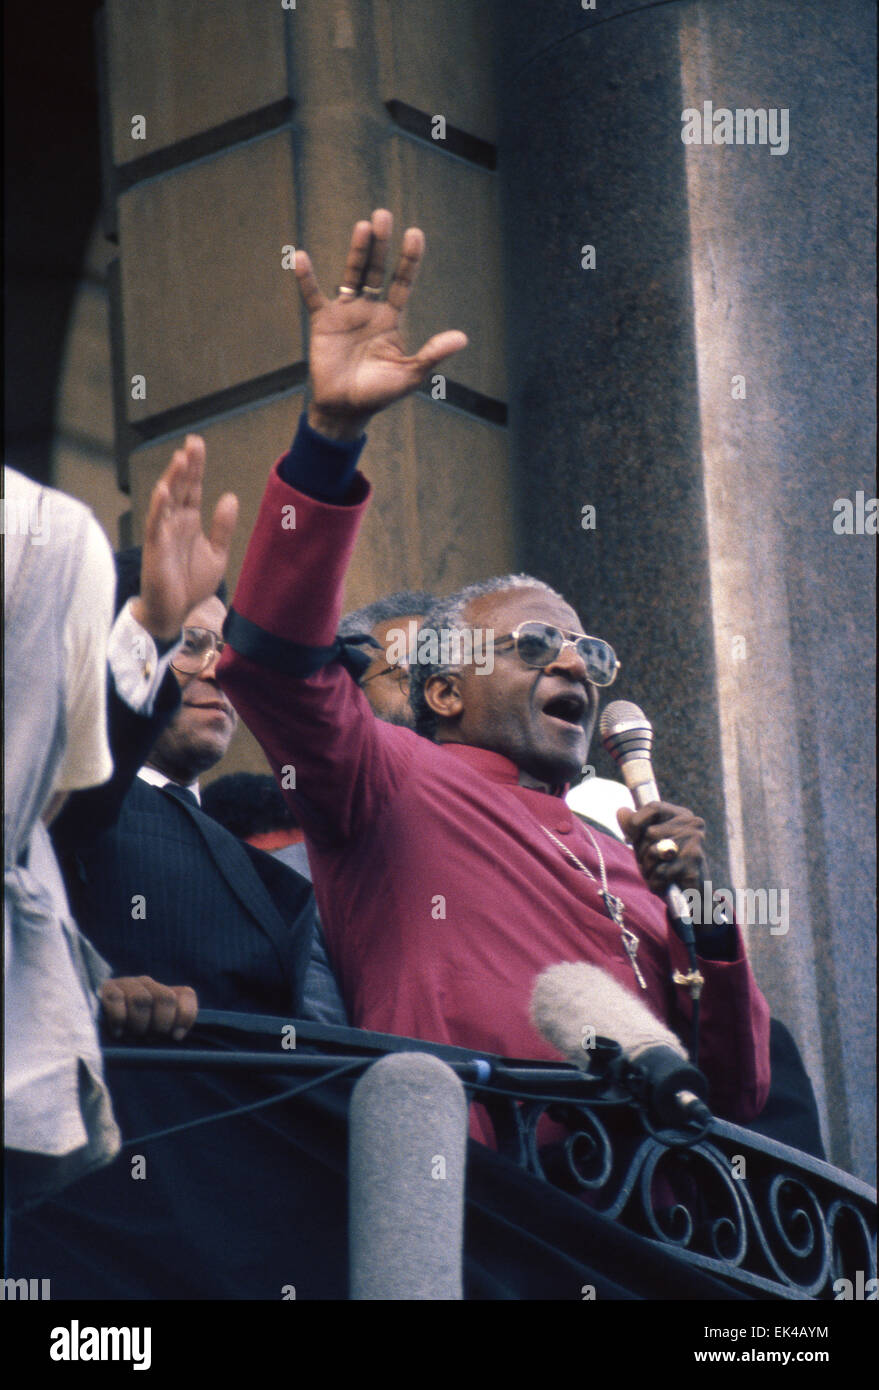 On 13 September 1989, 30 000 Capetonians from a diverse cross-section of the city marched in support of peace and the end of apartheid. The event, led by Mayor Gordon Oliver, Archbishop Tutu, Rev Frank Chikane, Moulana Faried Esack, Allan Boesak, and other religious leaders, was held in defiance of the State of Emergency which banned political protests and apartheid laws which enforced racial segregation.   'We have scored a great victory for justice and peace,' Tutu told the many protestors.  'We Shall Overcome,' was sung by the marchers as they walked arm in arm from St. George's Cathedral t Stock Photo